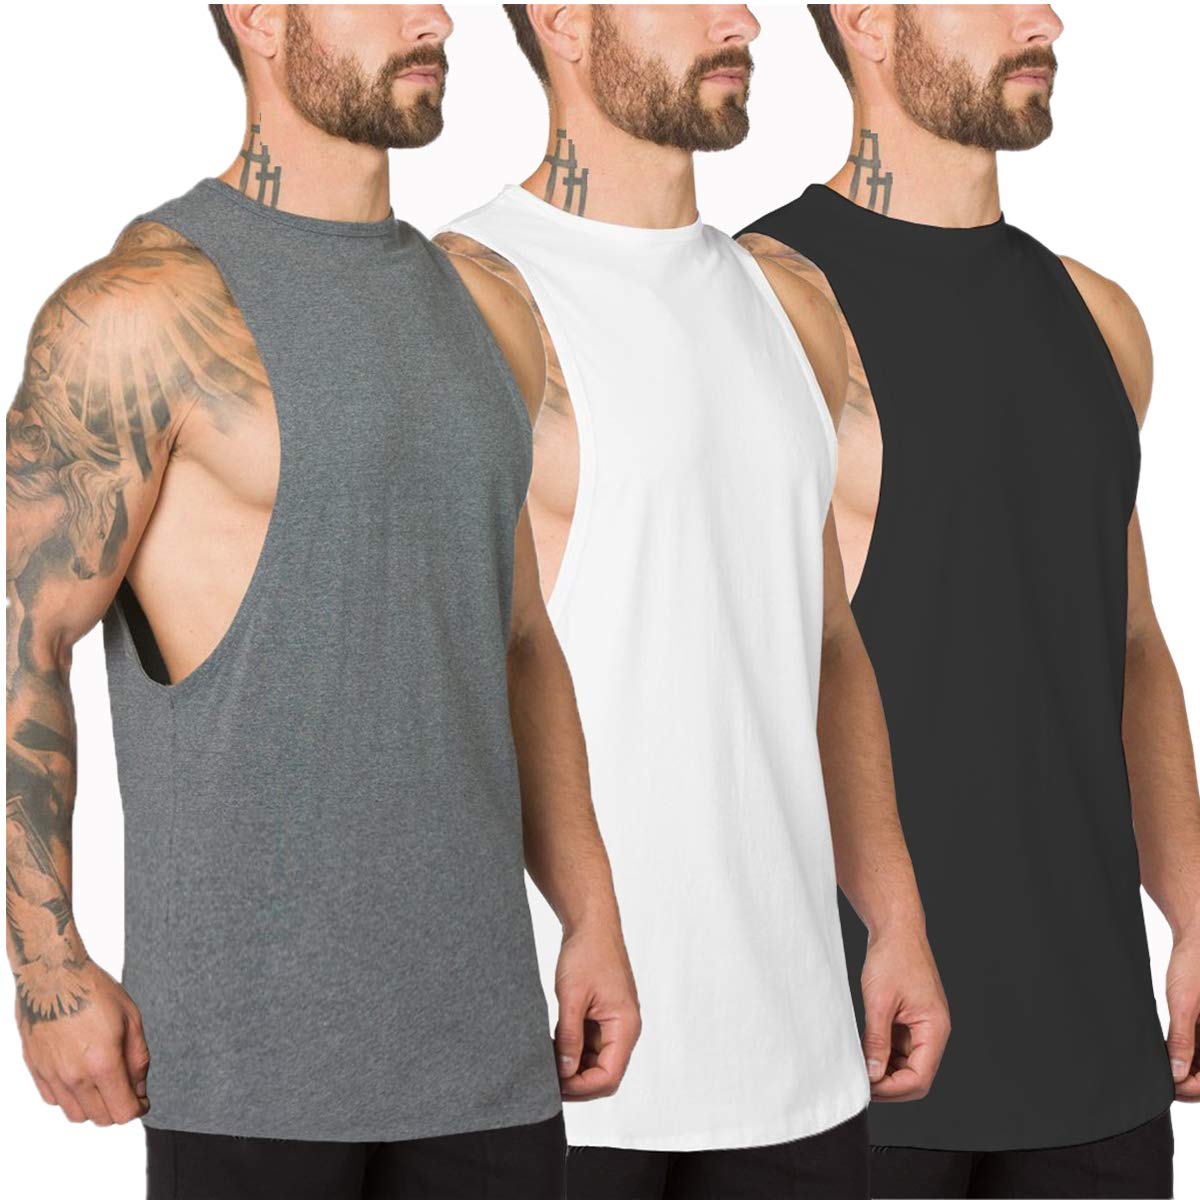  Mens Drop Armhole Tank Top for Workout Bodybuilding